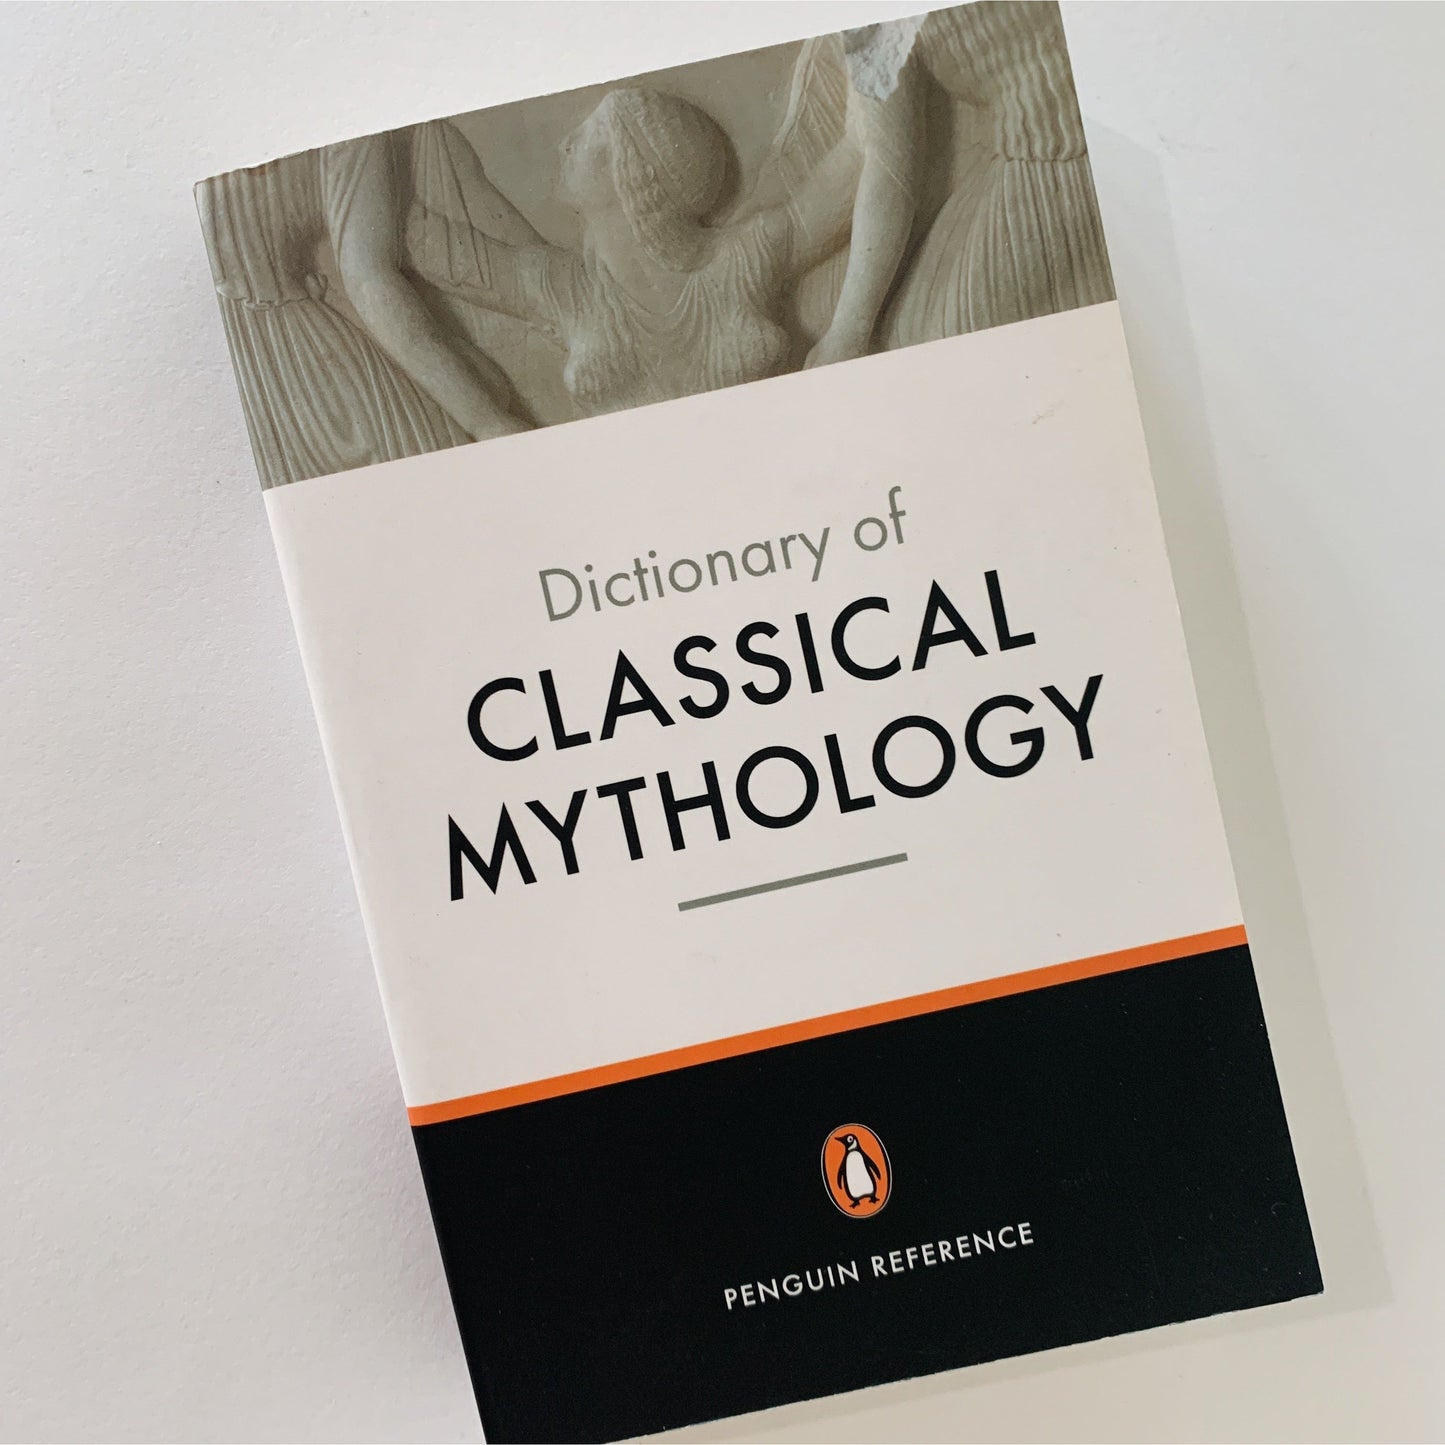 Dictionary of Classical Mythology, Penguin Reference, 1991